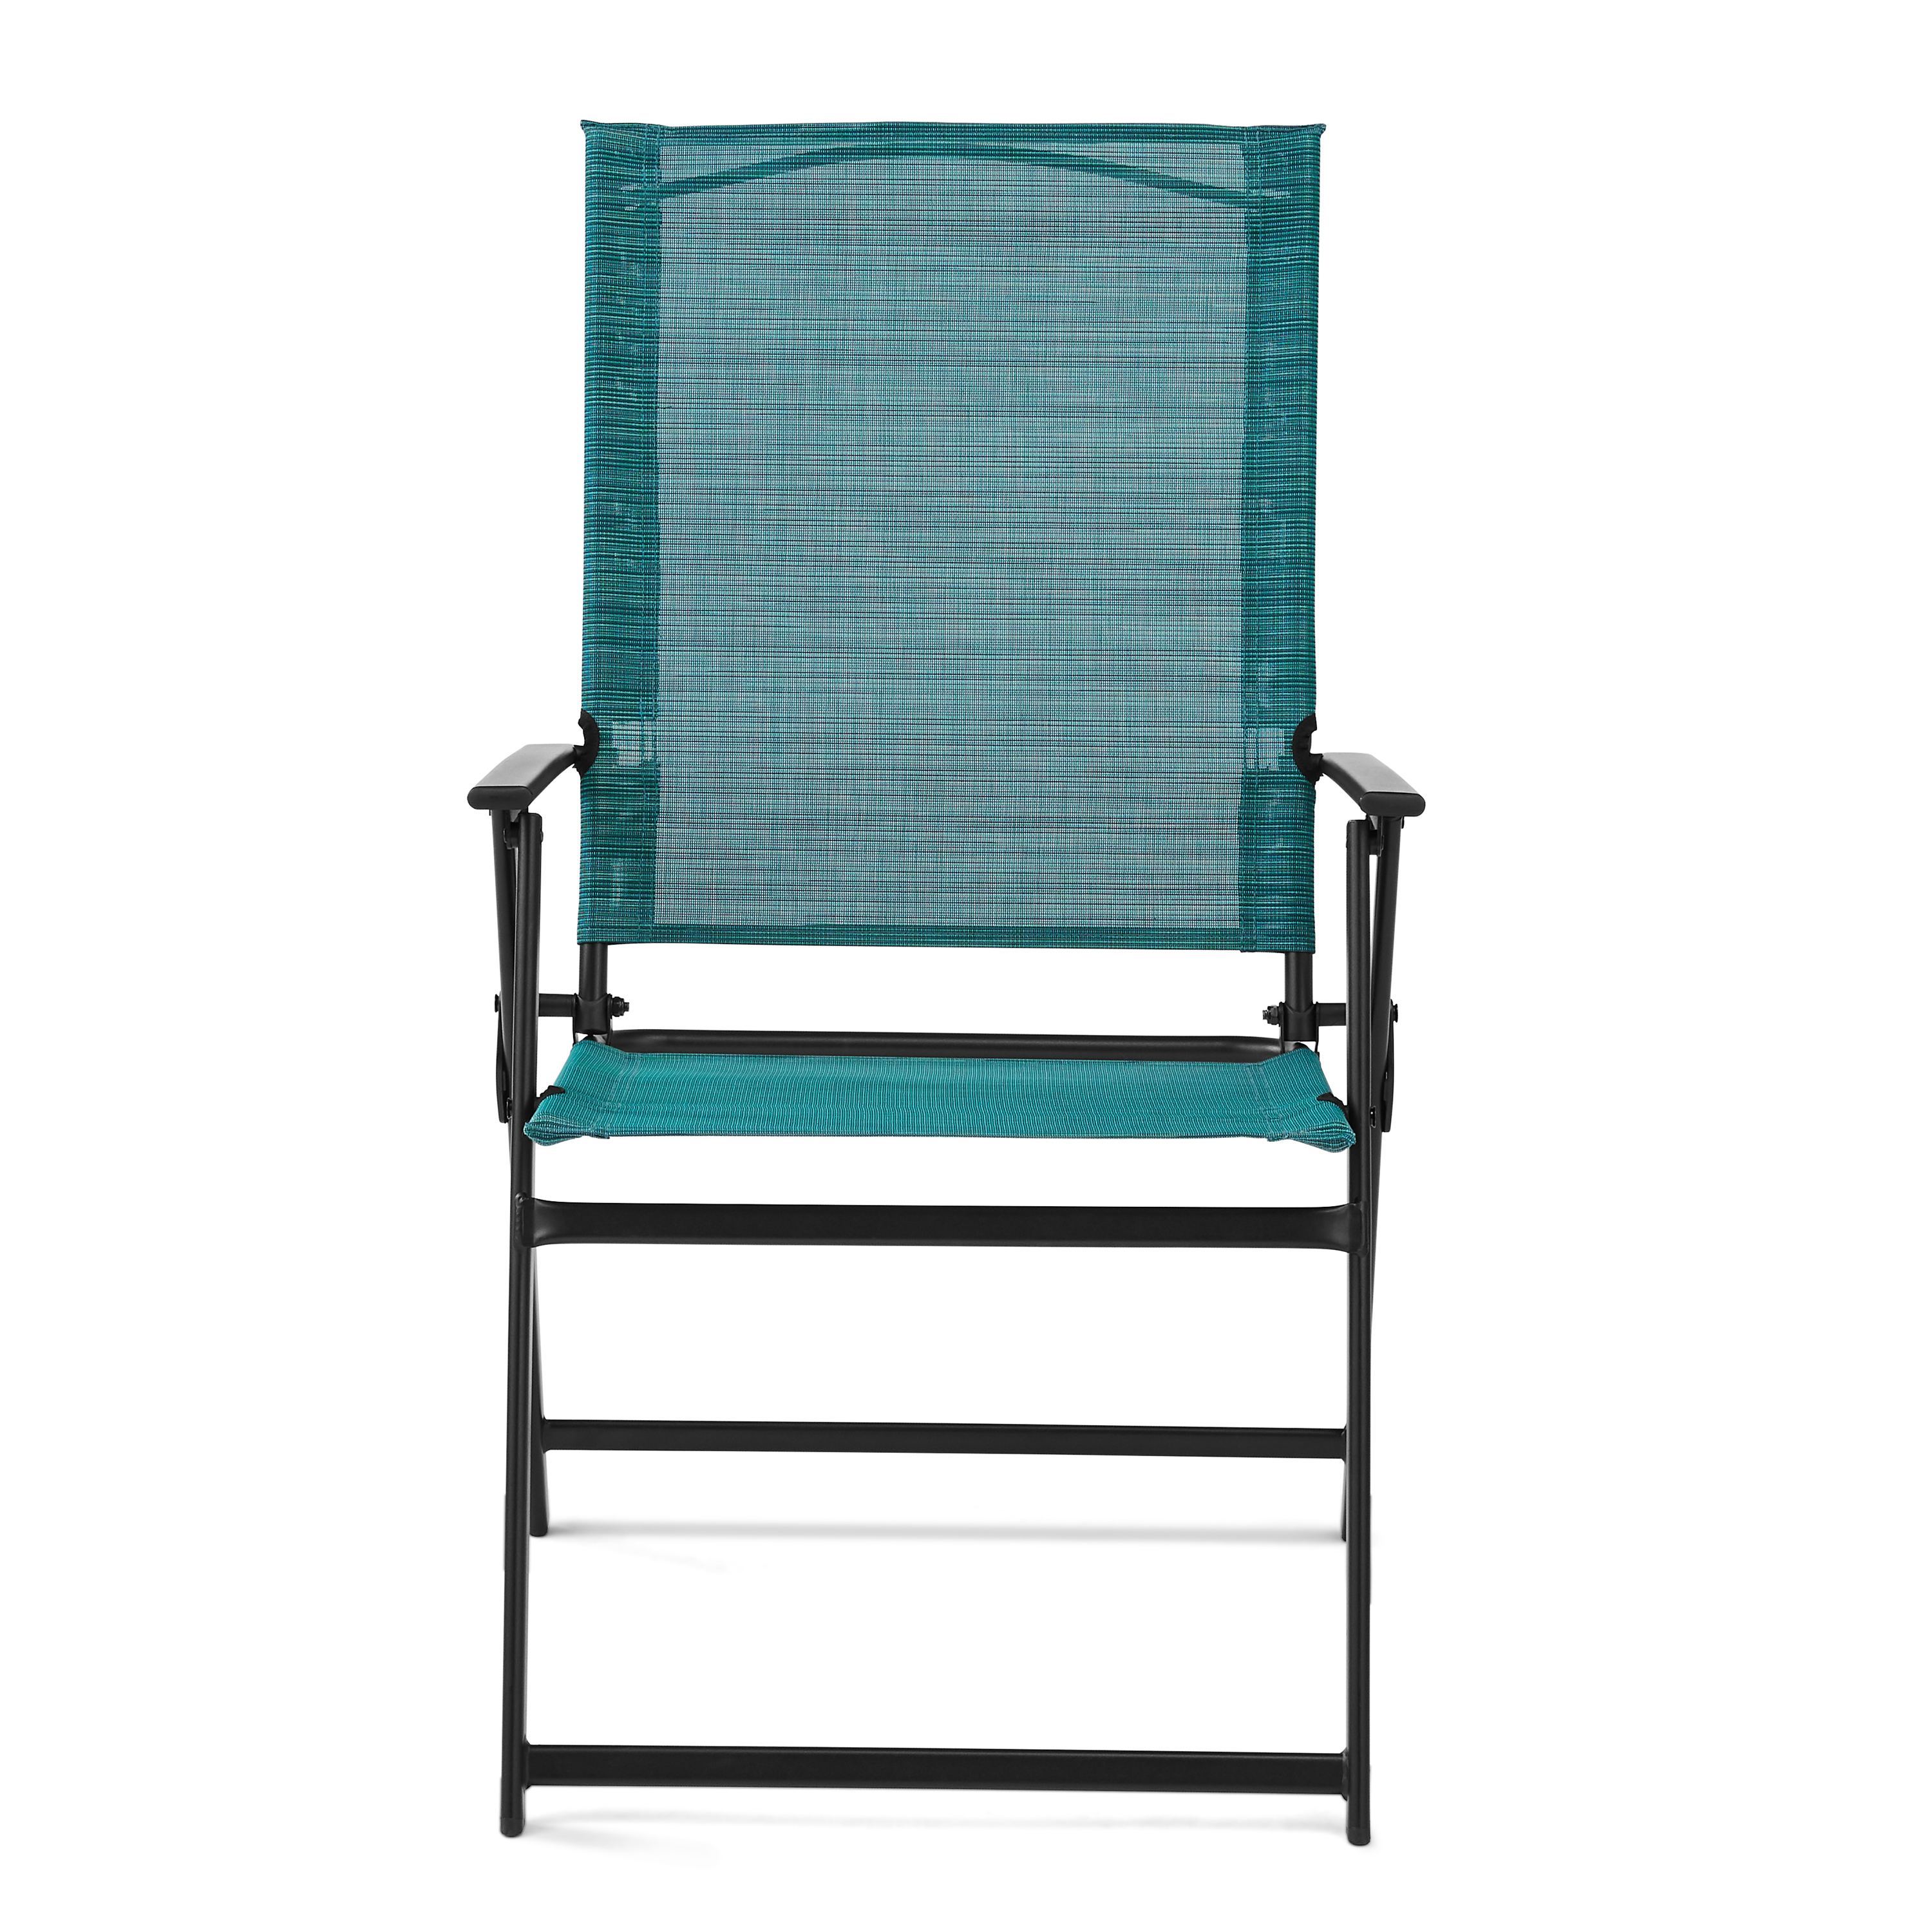 Mainstays Greyson Steel and Sling Folding Outdoor Patio Armchair - Set of 2, Teal - image 1 of 8